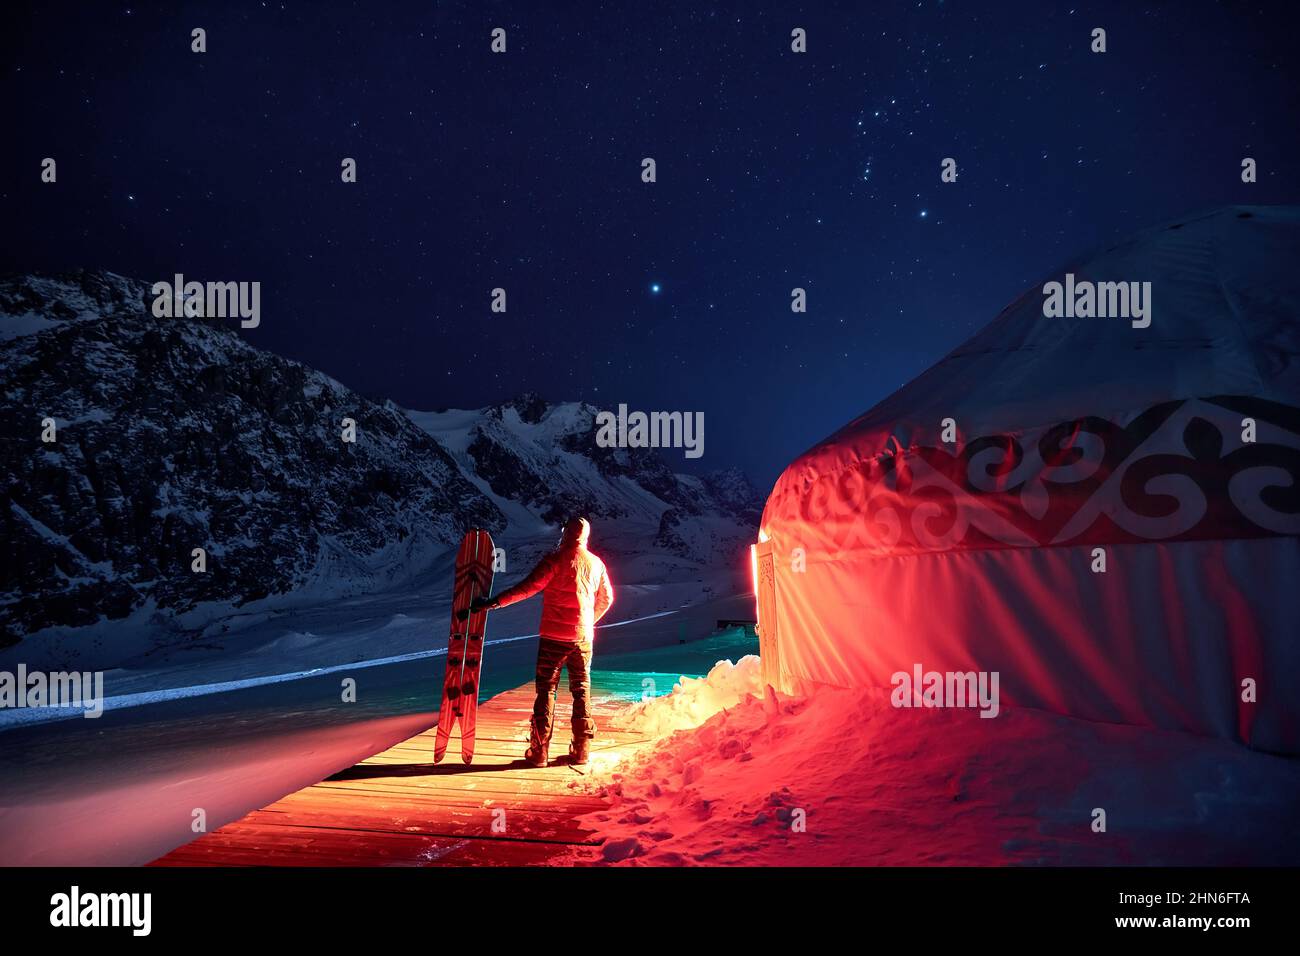 A man with a snowboard standing near a yurt at night in winter in the mountains Stock Photo